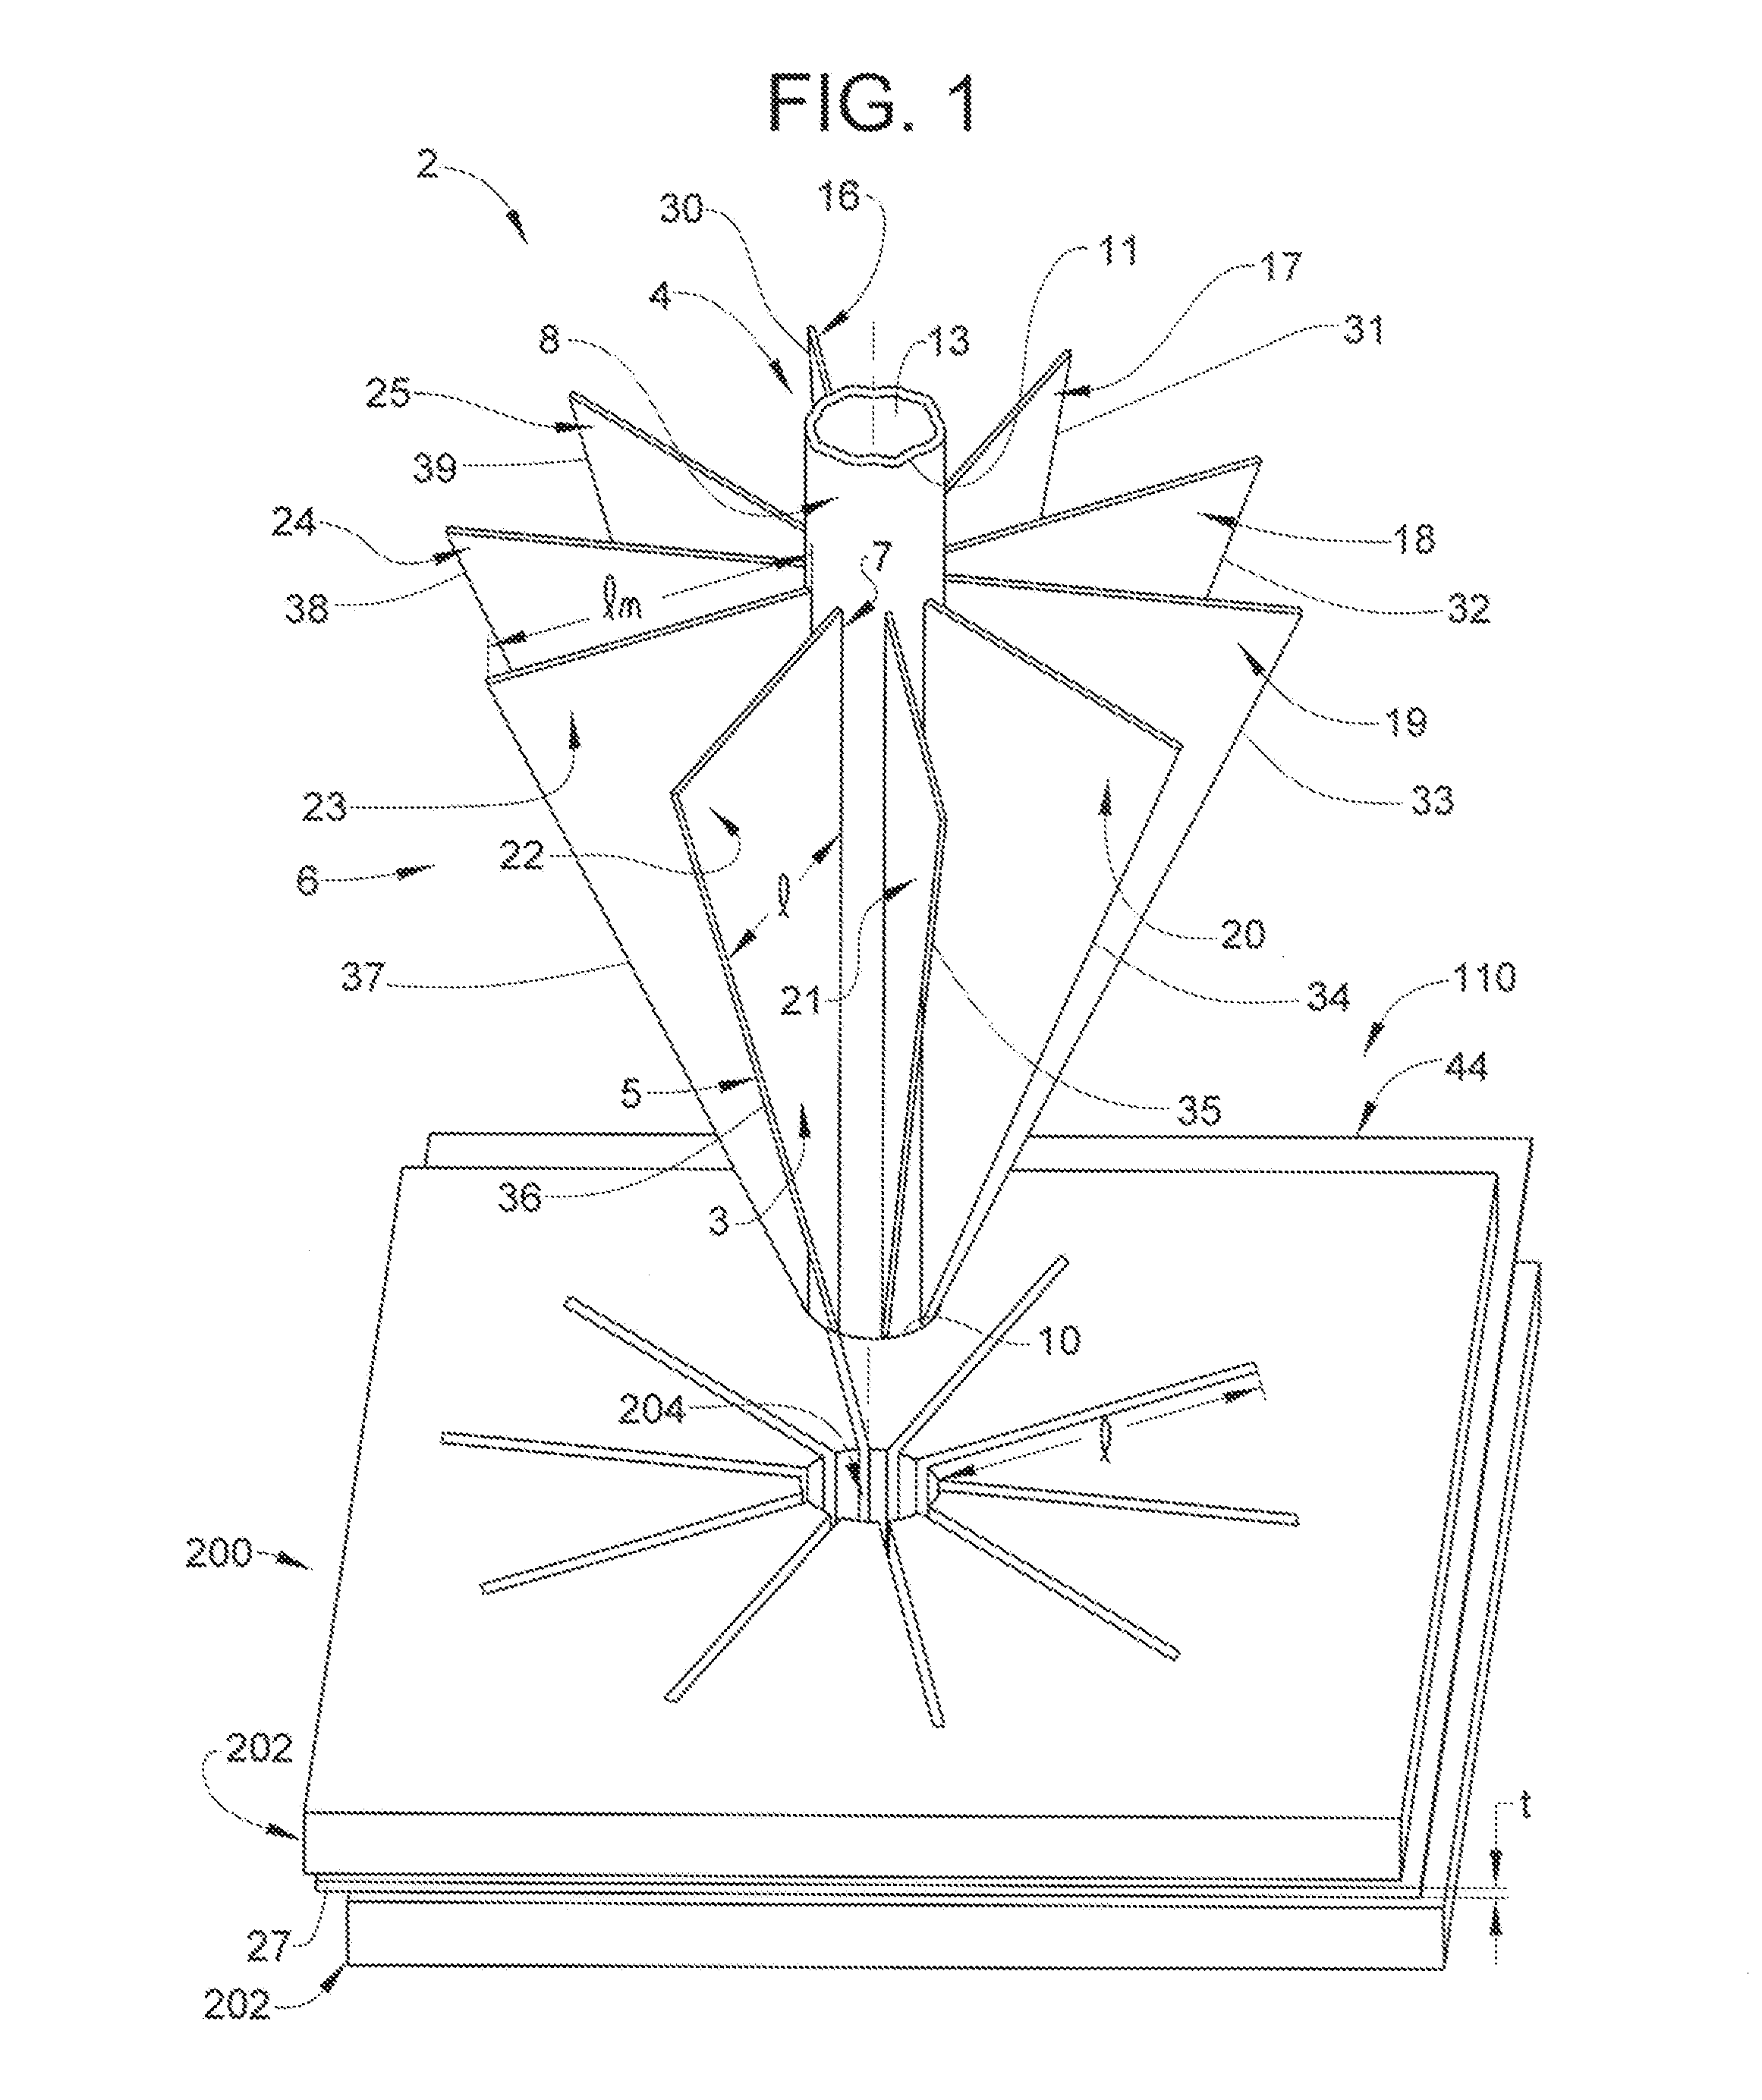 Elastic averaging alignment system, method of making the same and cutting punch therefor